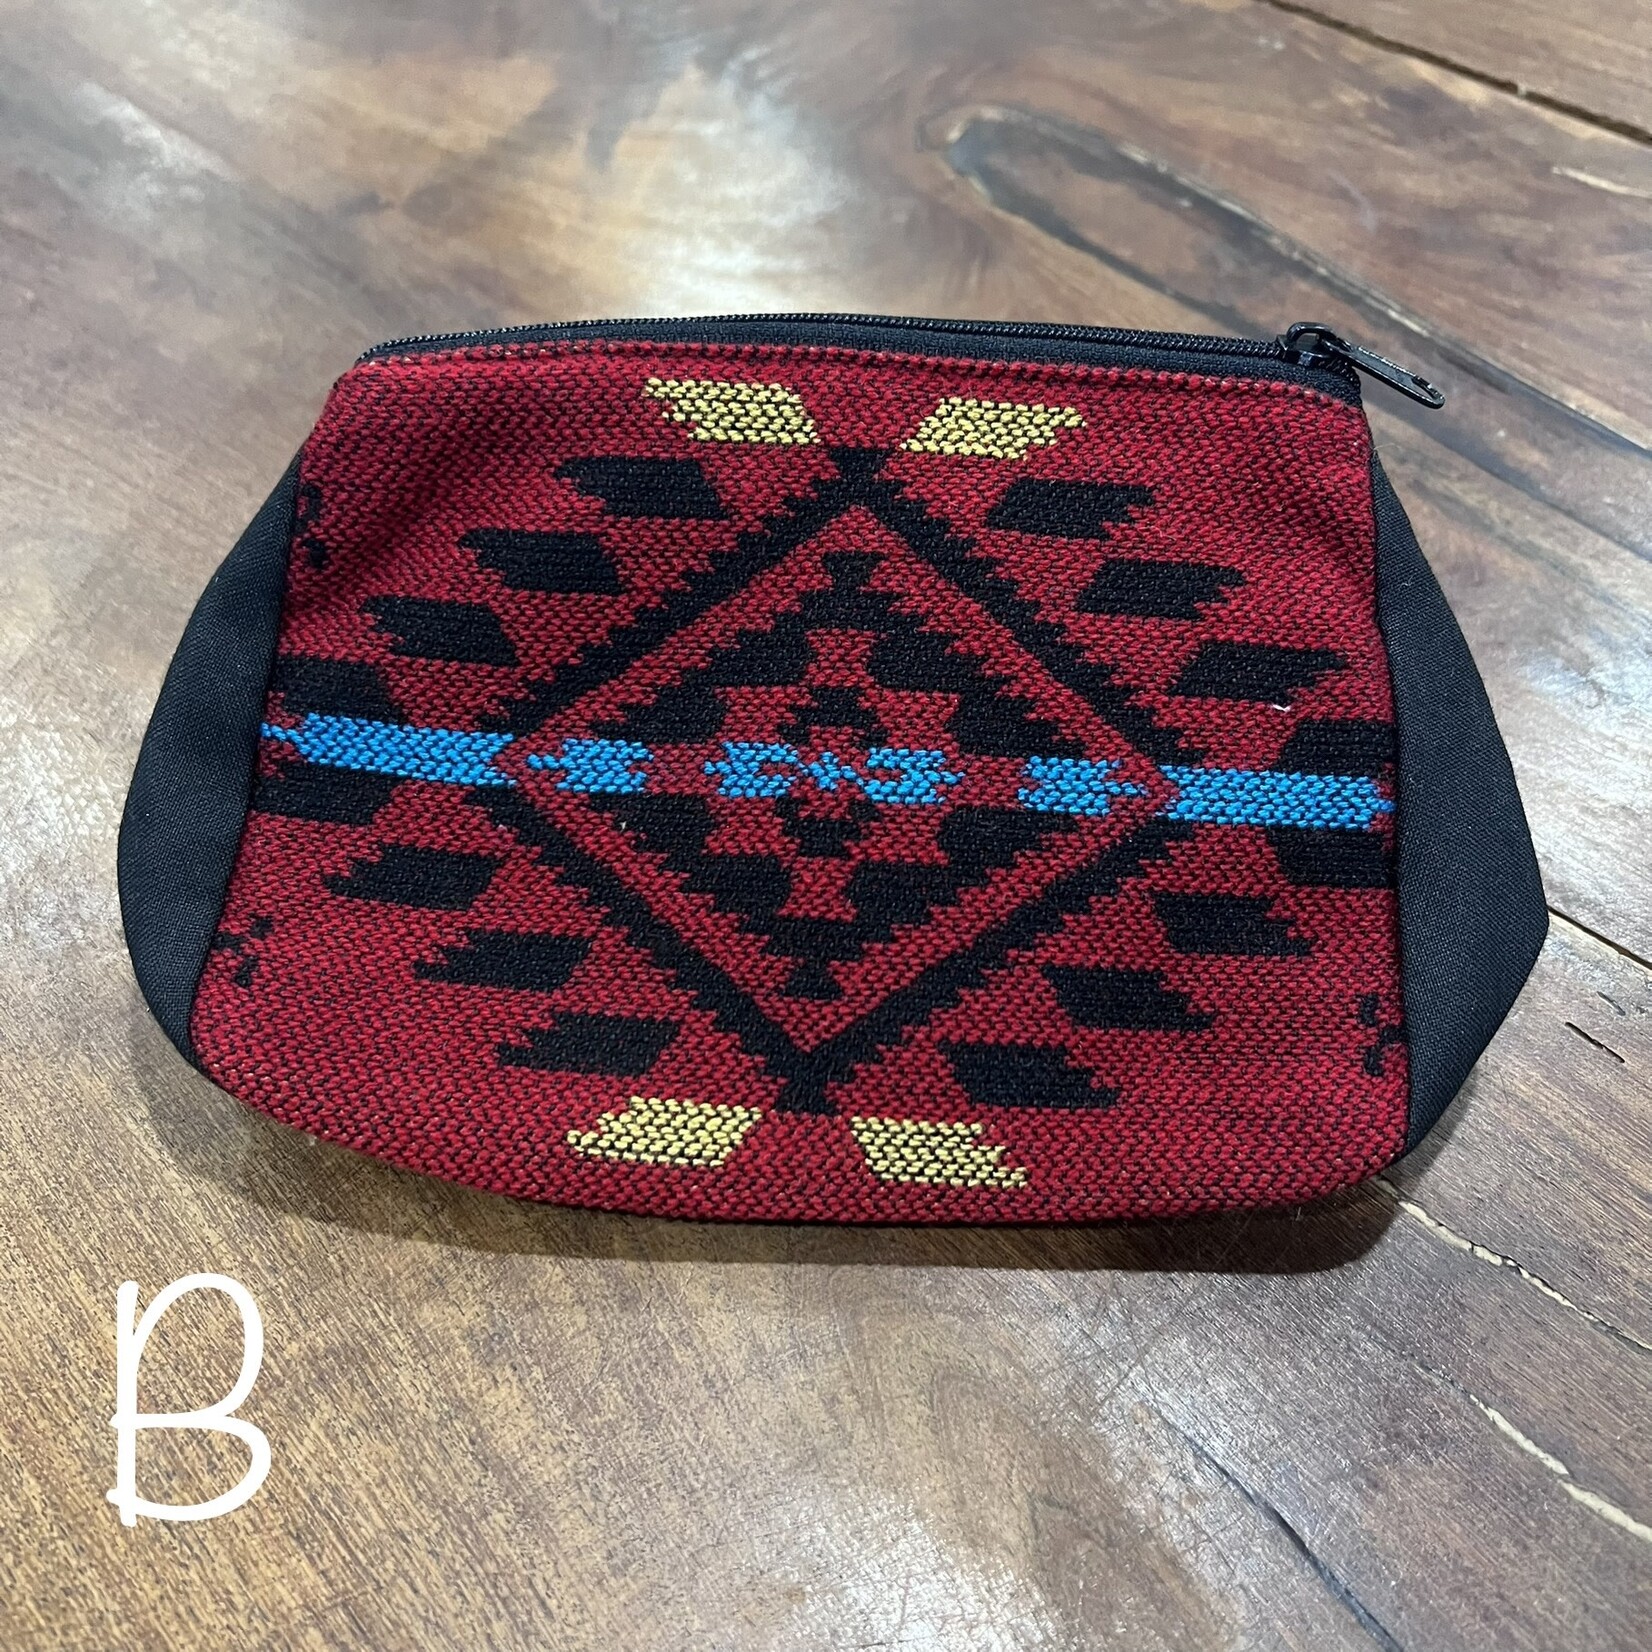 Small Southwest Cosmetic Bag (5"x7")